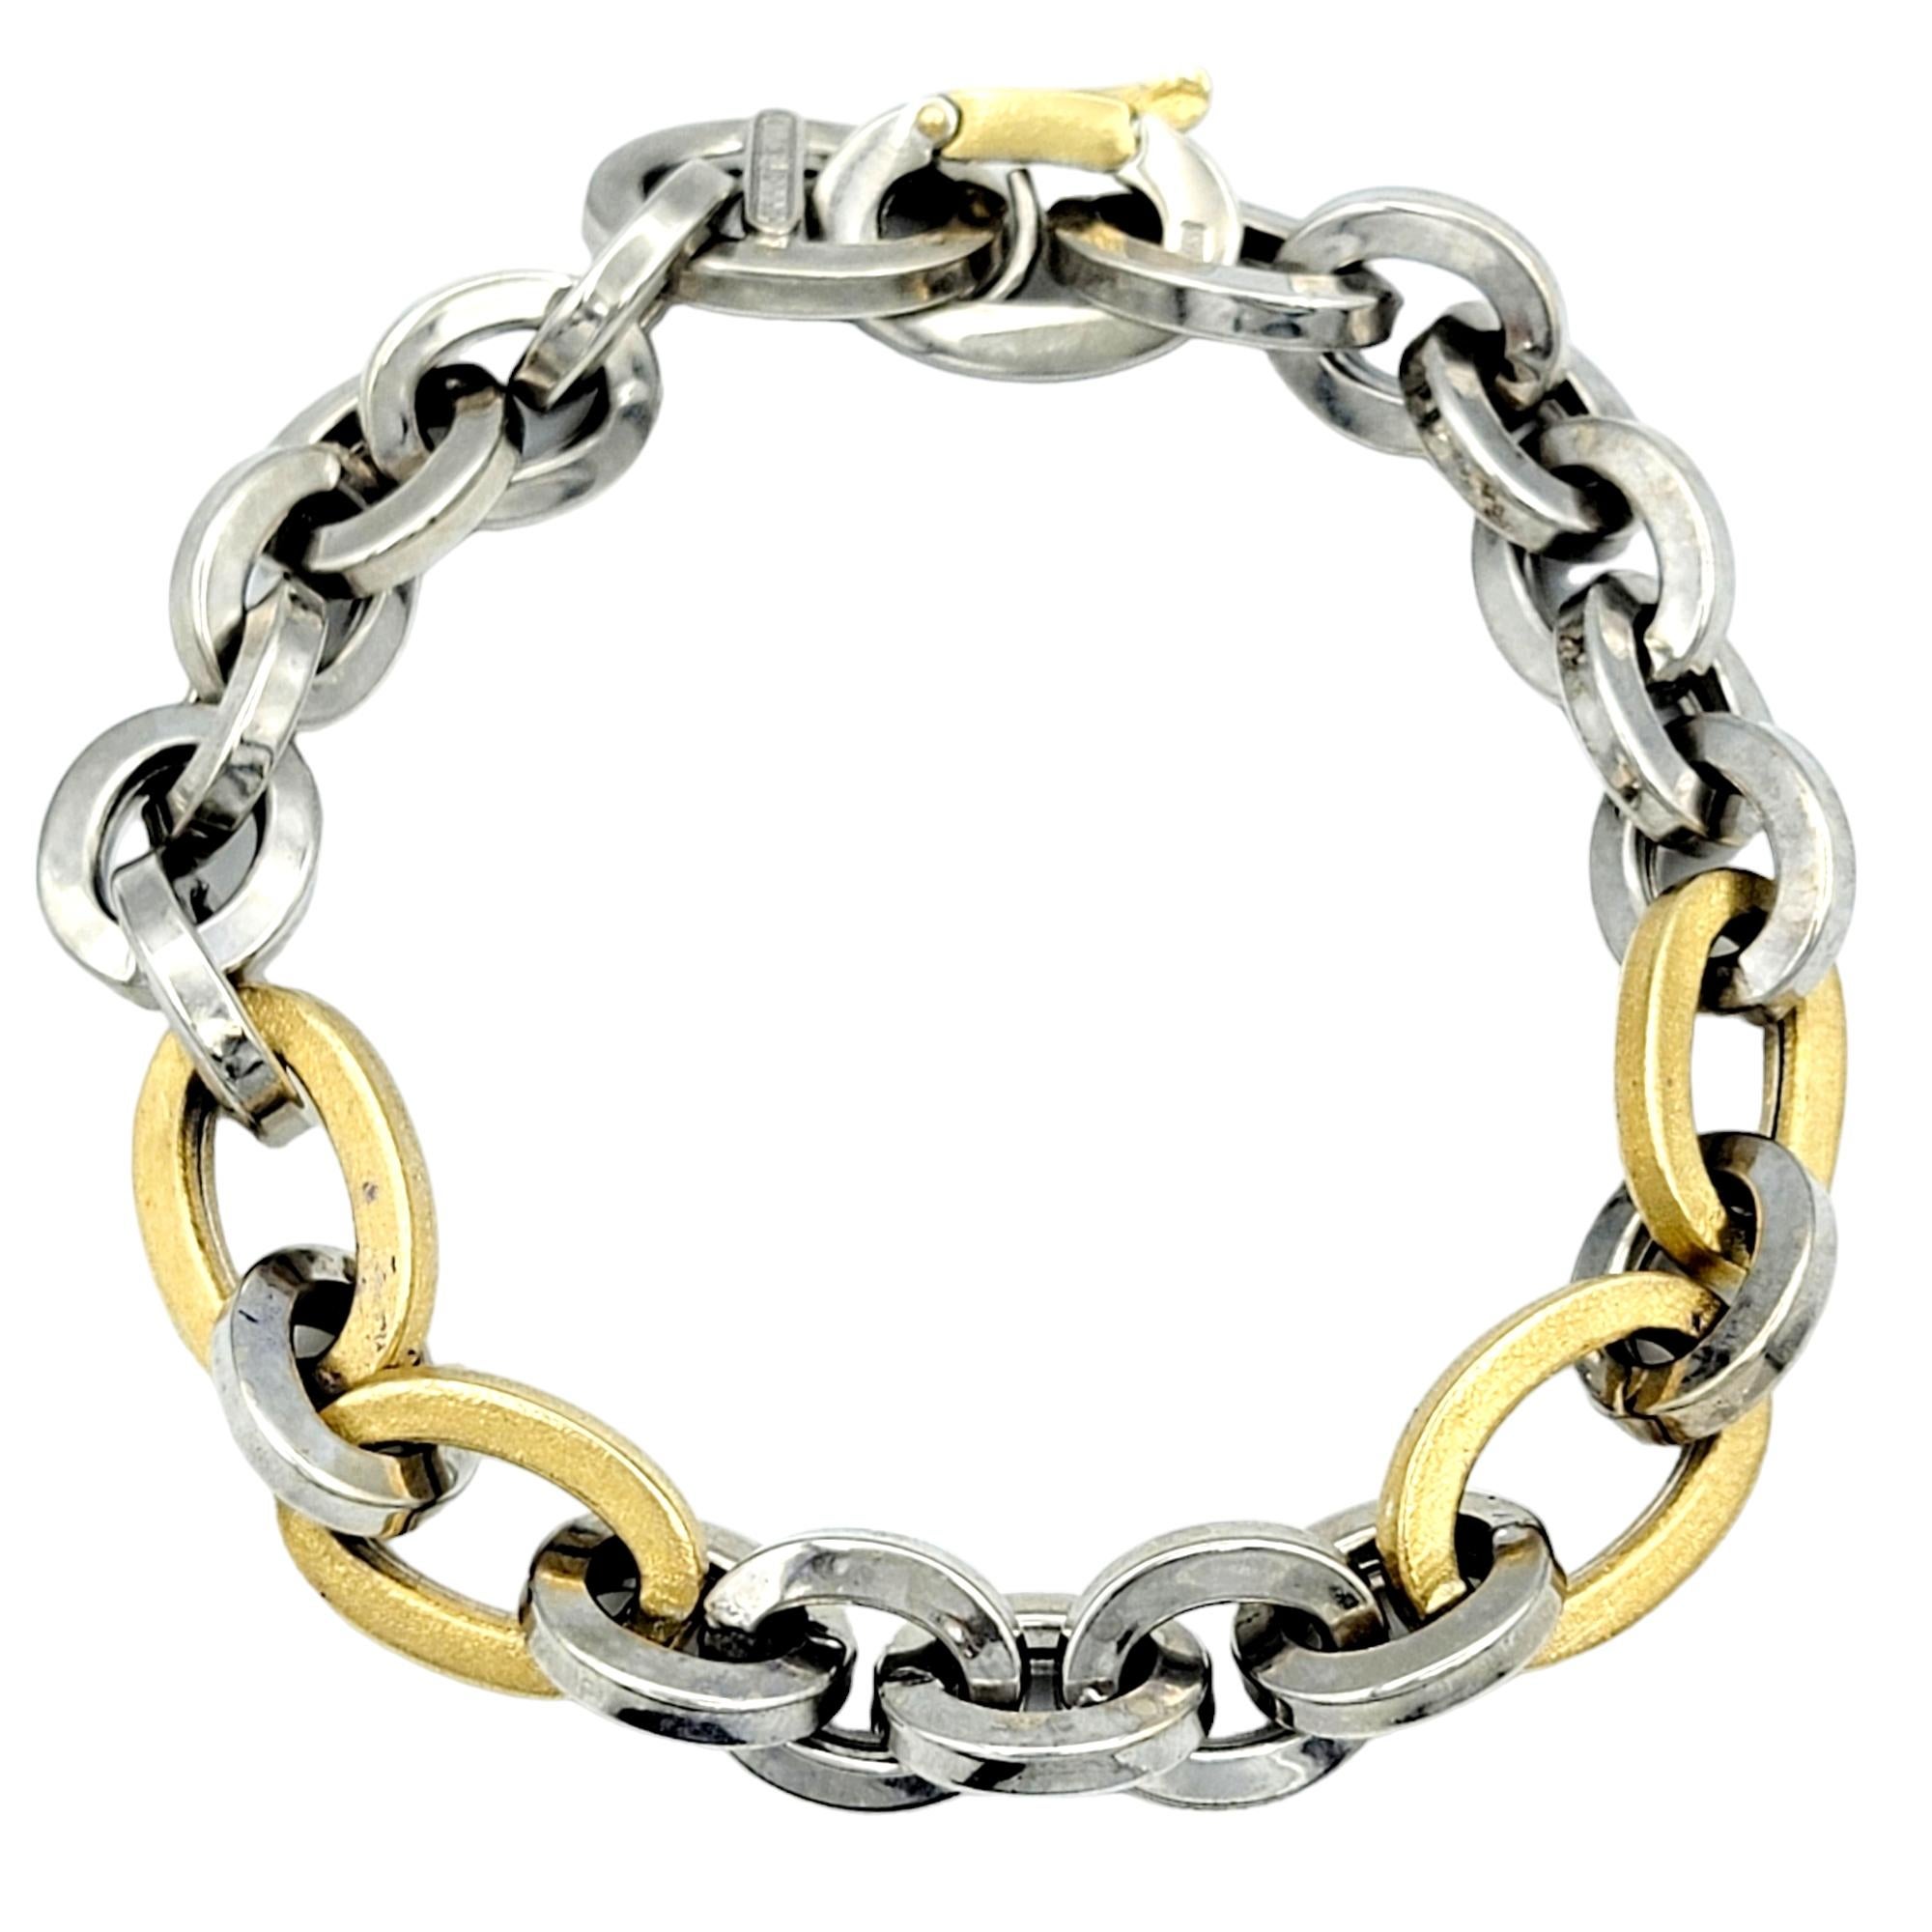 Contemporary Unoaerre Large Chunky Two-Tone Chain Link Bracelet in 18 Karat Gold For Sale